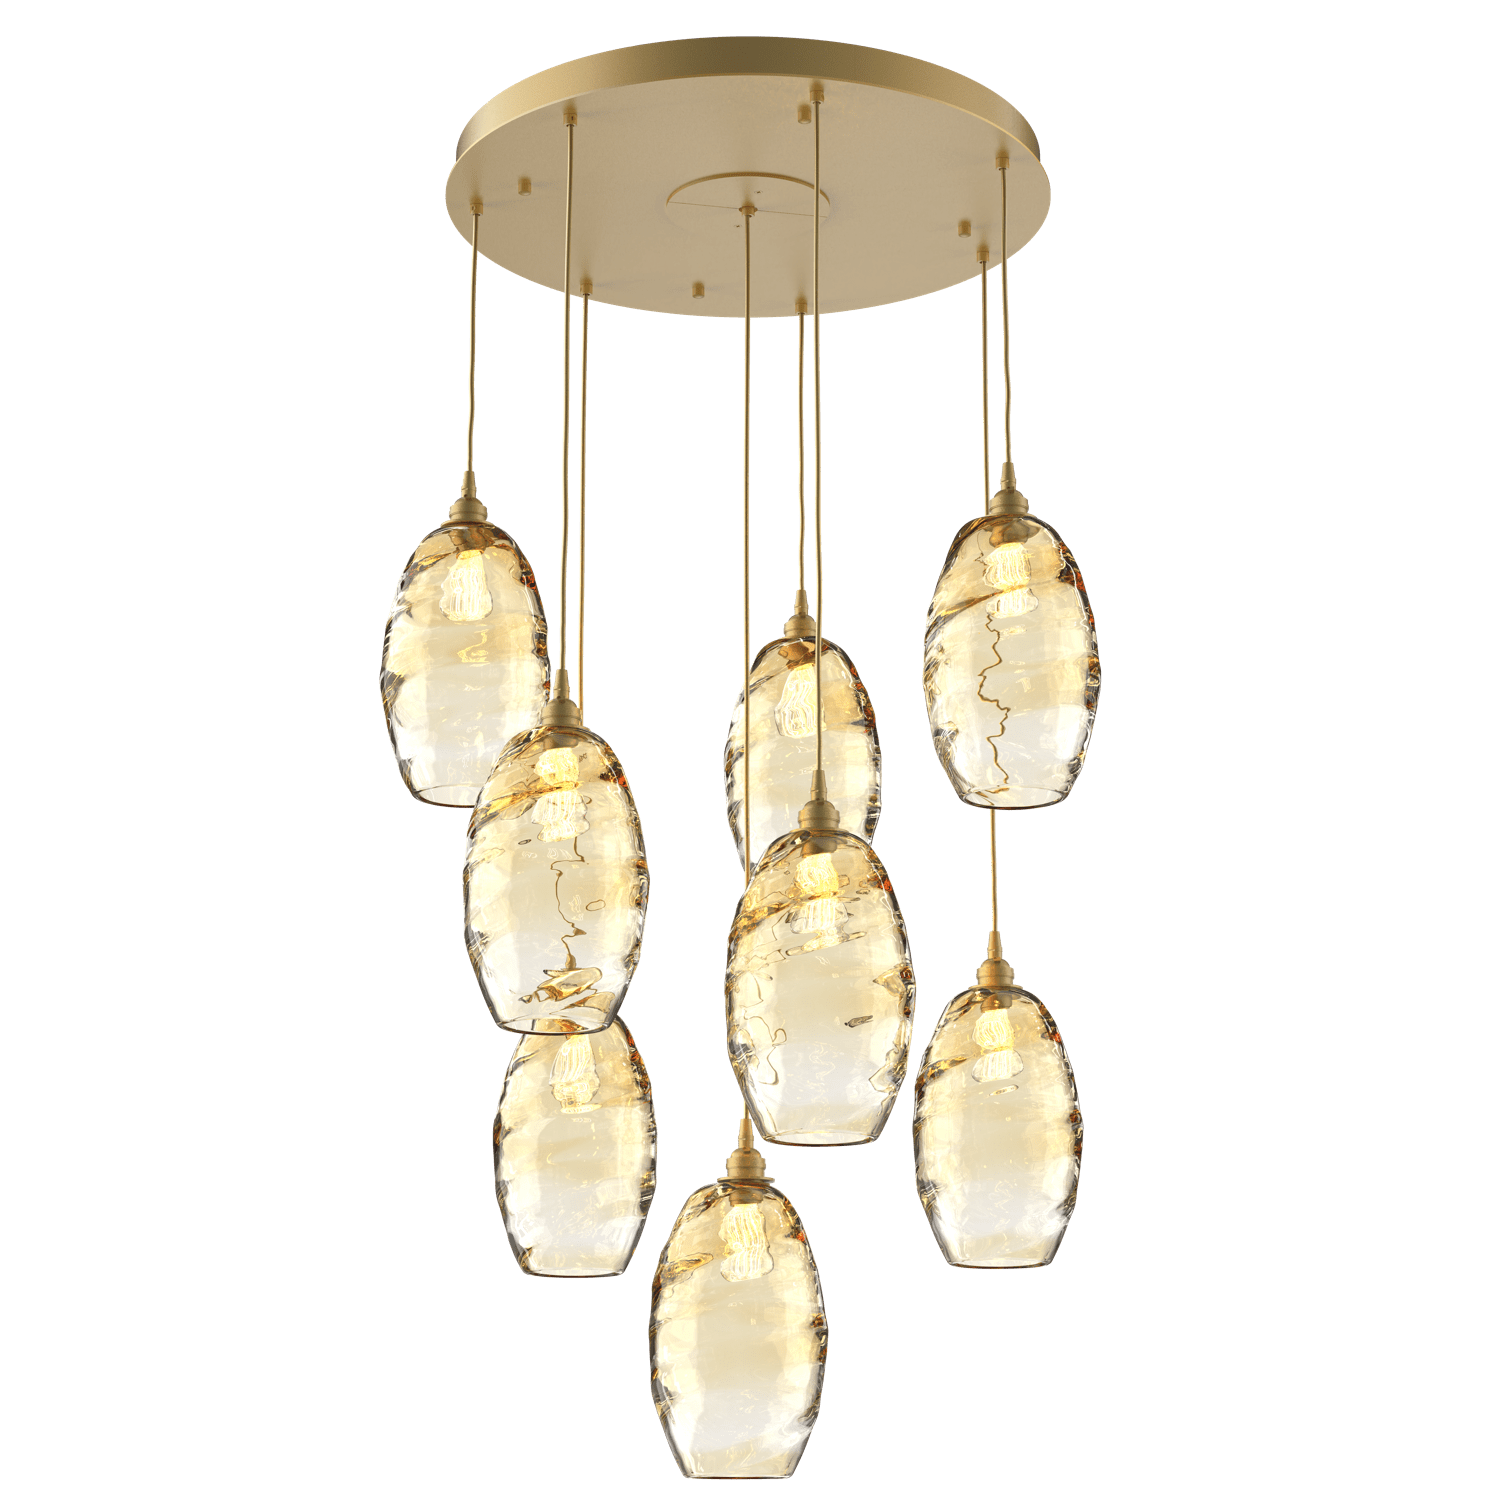 CHB0035-08-GB-OA-Hammerton-Studio-Optic-Blown-Glass-Elisse-8-light-round-pendant-chandelier-with-gilded-brass-finish-and-optic-amber-blown-glass-shades-and-incandescent-lamping